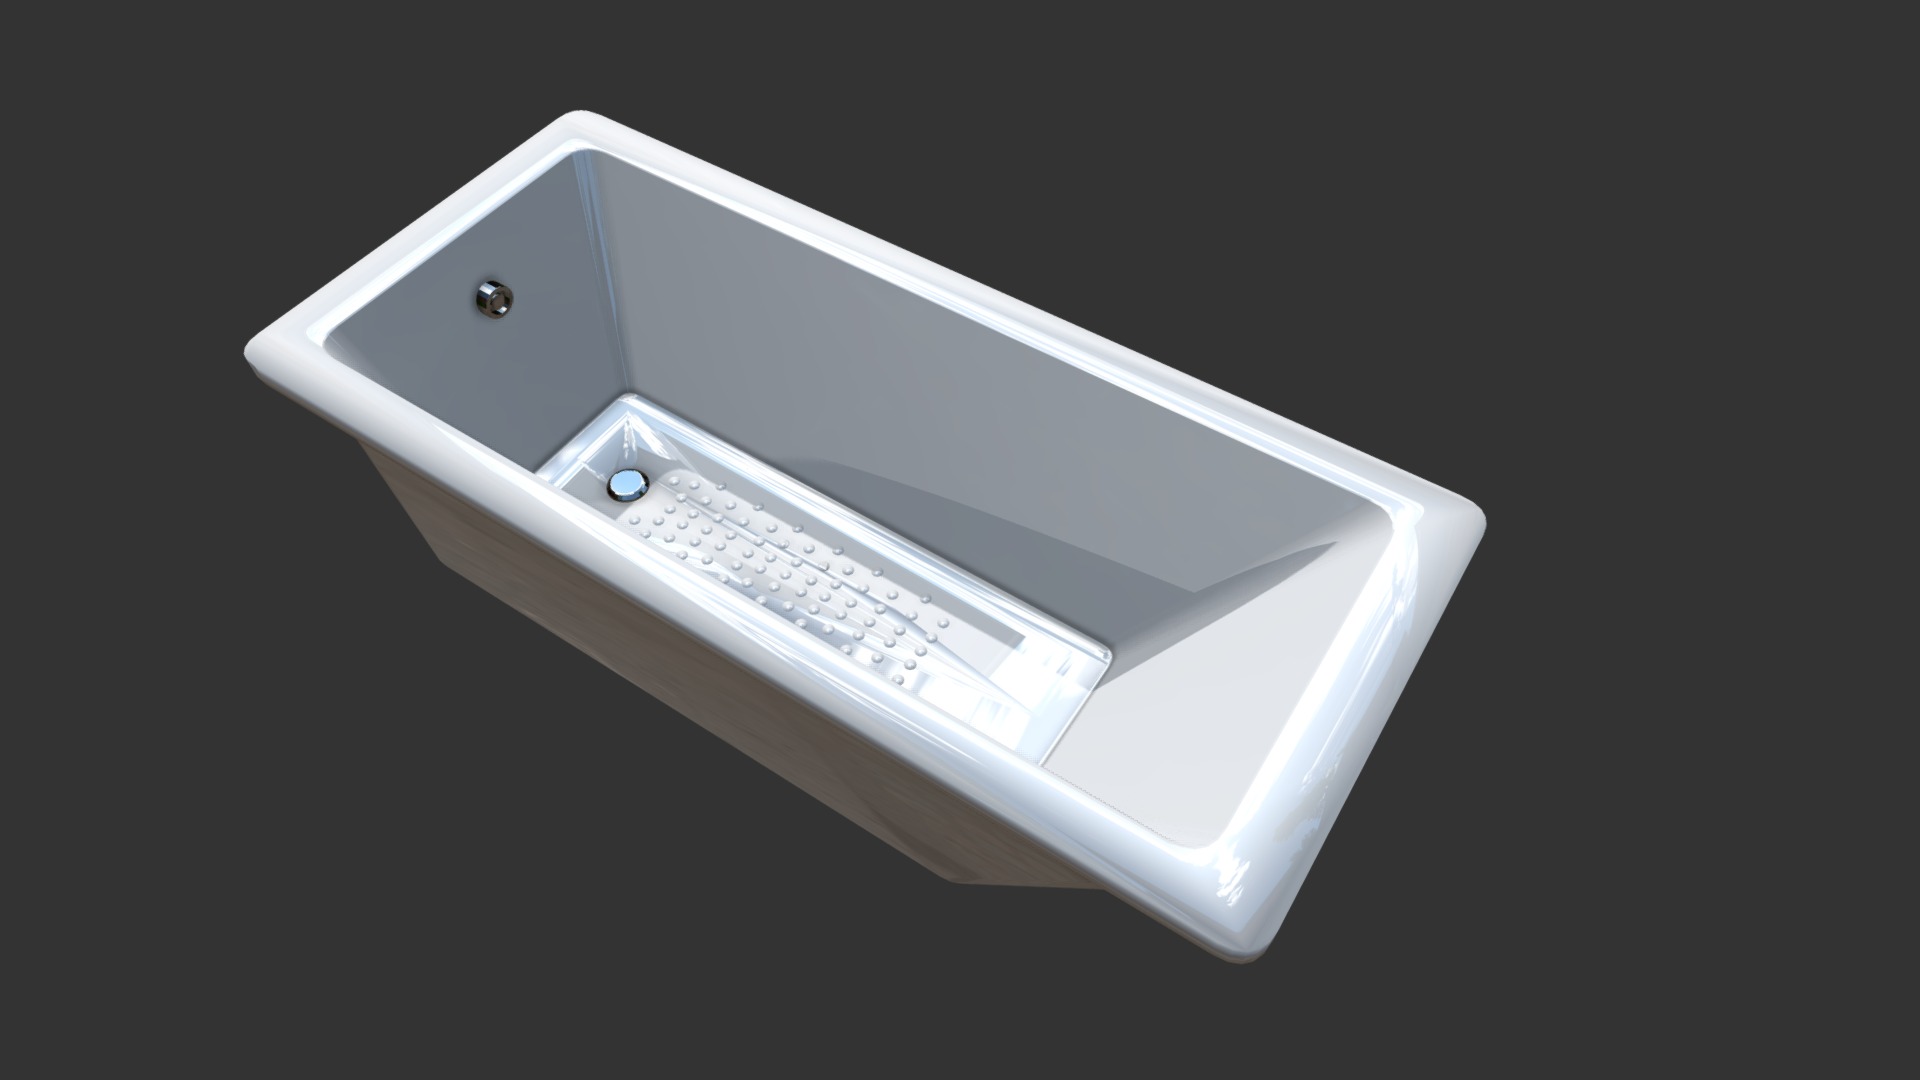 3D model TT1R-2B - This is a 3D model of the TT1R-2B. The 3D model is about a white rectangular object with a screen.